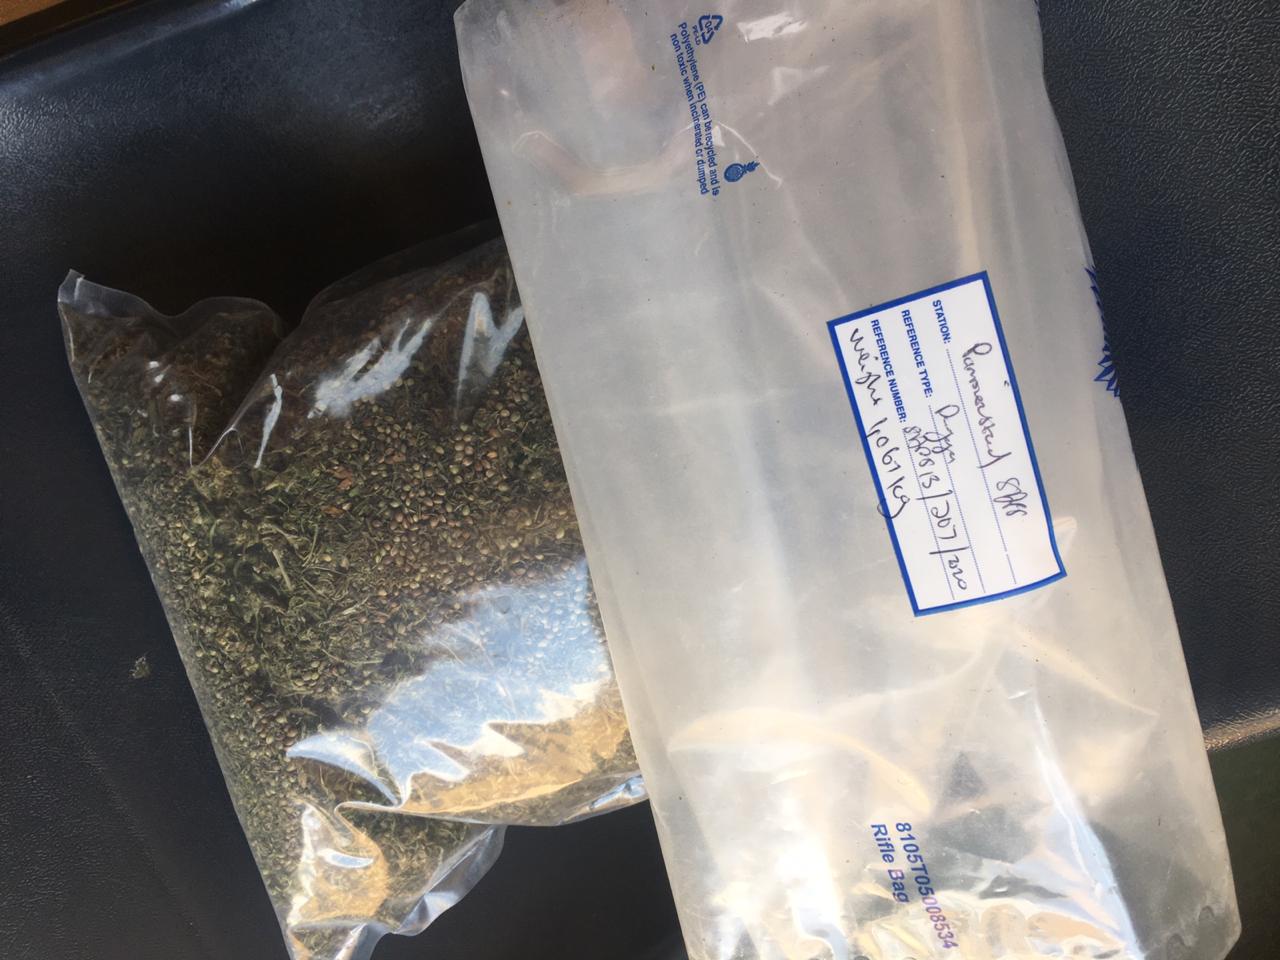 Three arrested for dealing in drugs in Hartswater area